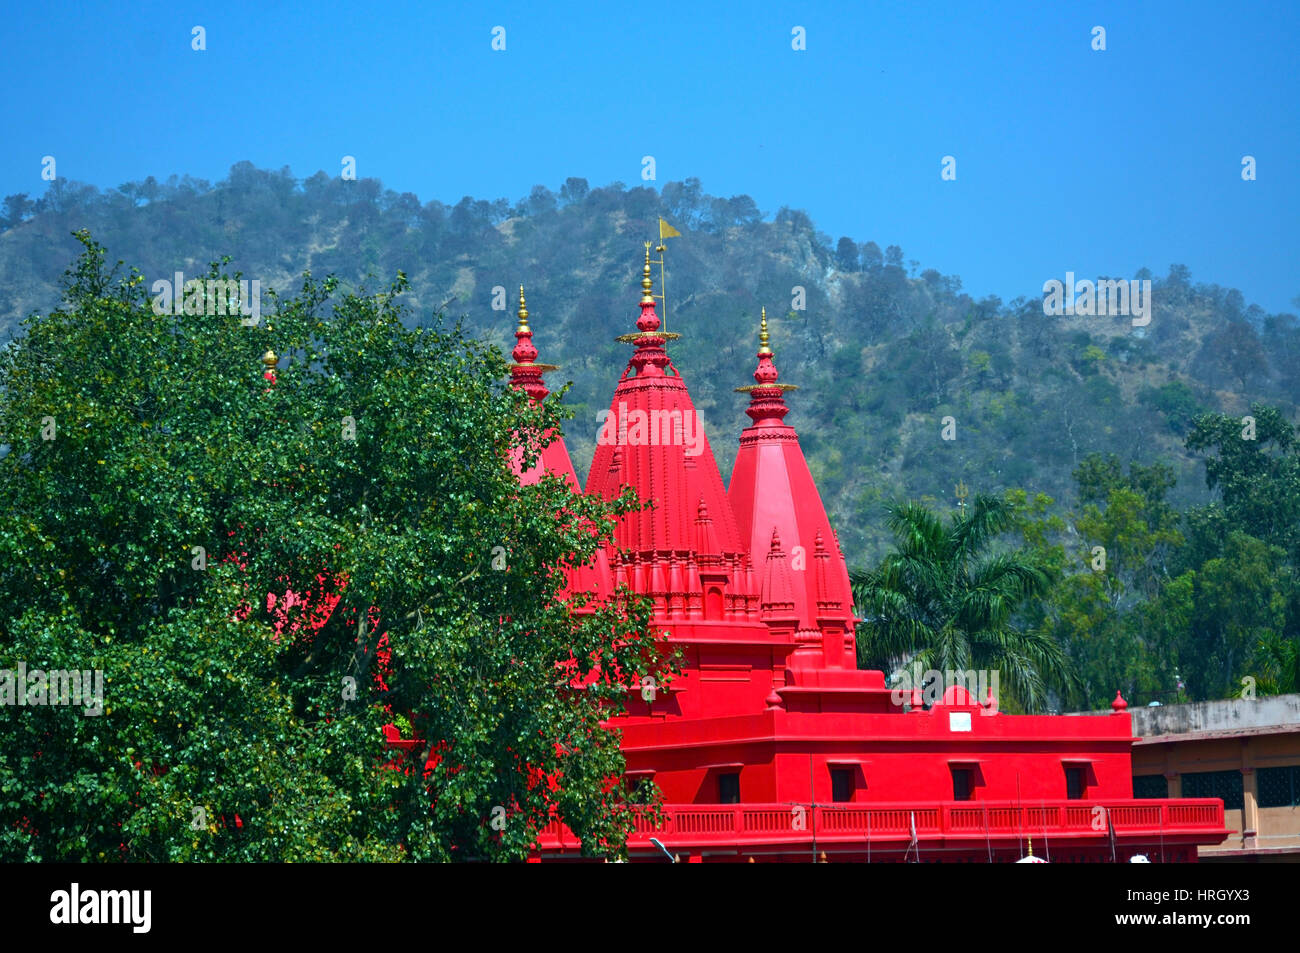 Red Temple on the bank of the Ganga River in Haridwar, India Stock Photo